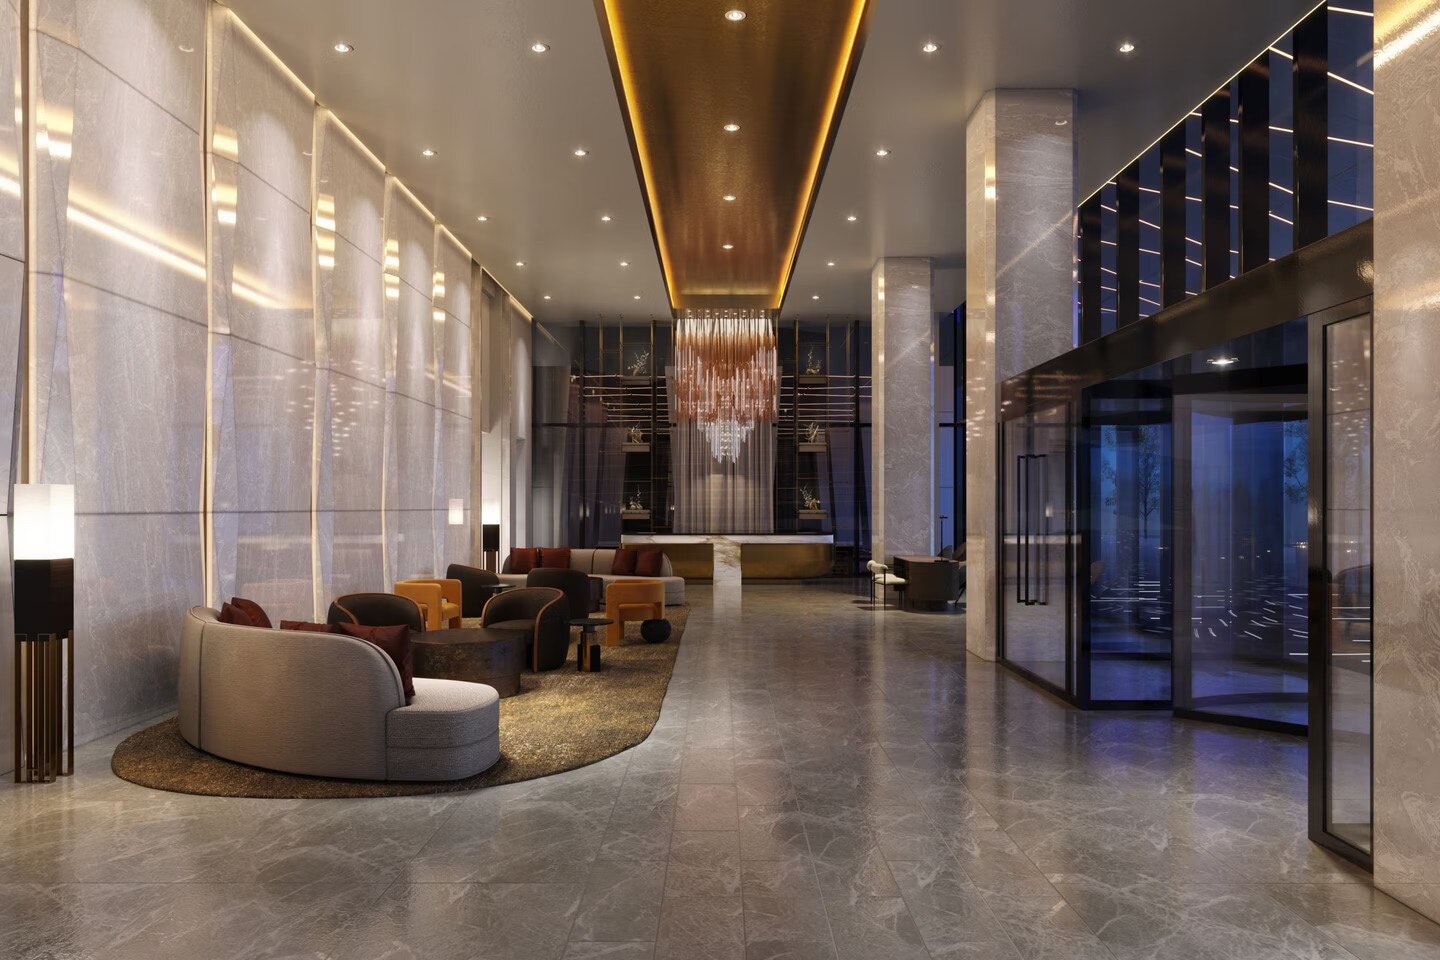 ROH New Hotel Openings: The St. Regis Chicago lobby